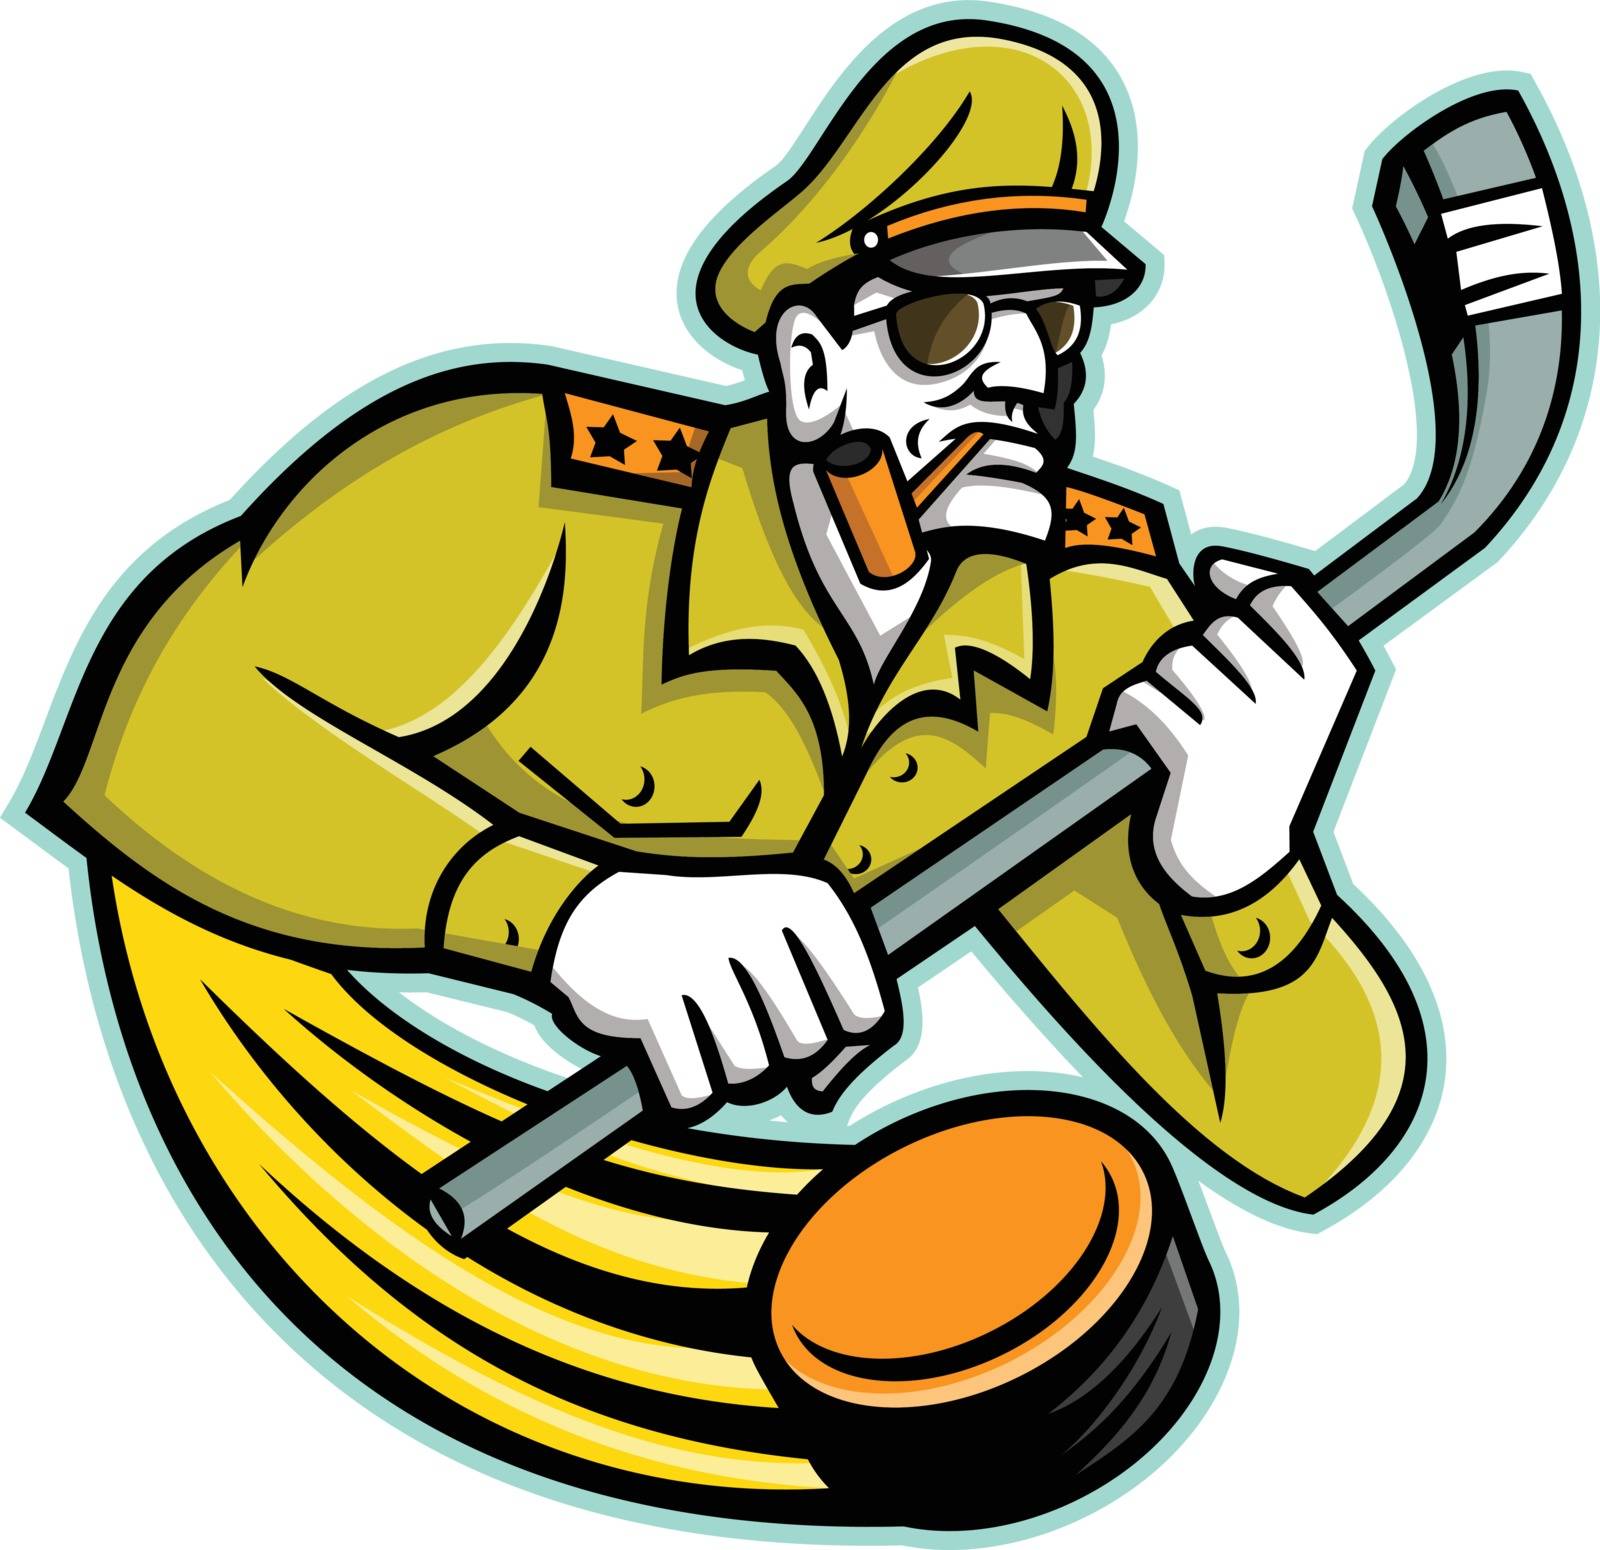 Mascot icon illustration of bust of a military army general holding an ice hockey stick viewed from front on isolated background in retro style.